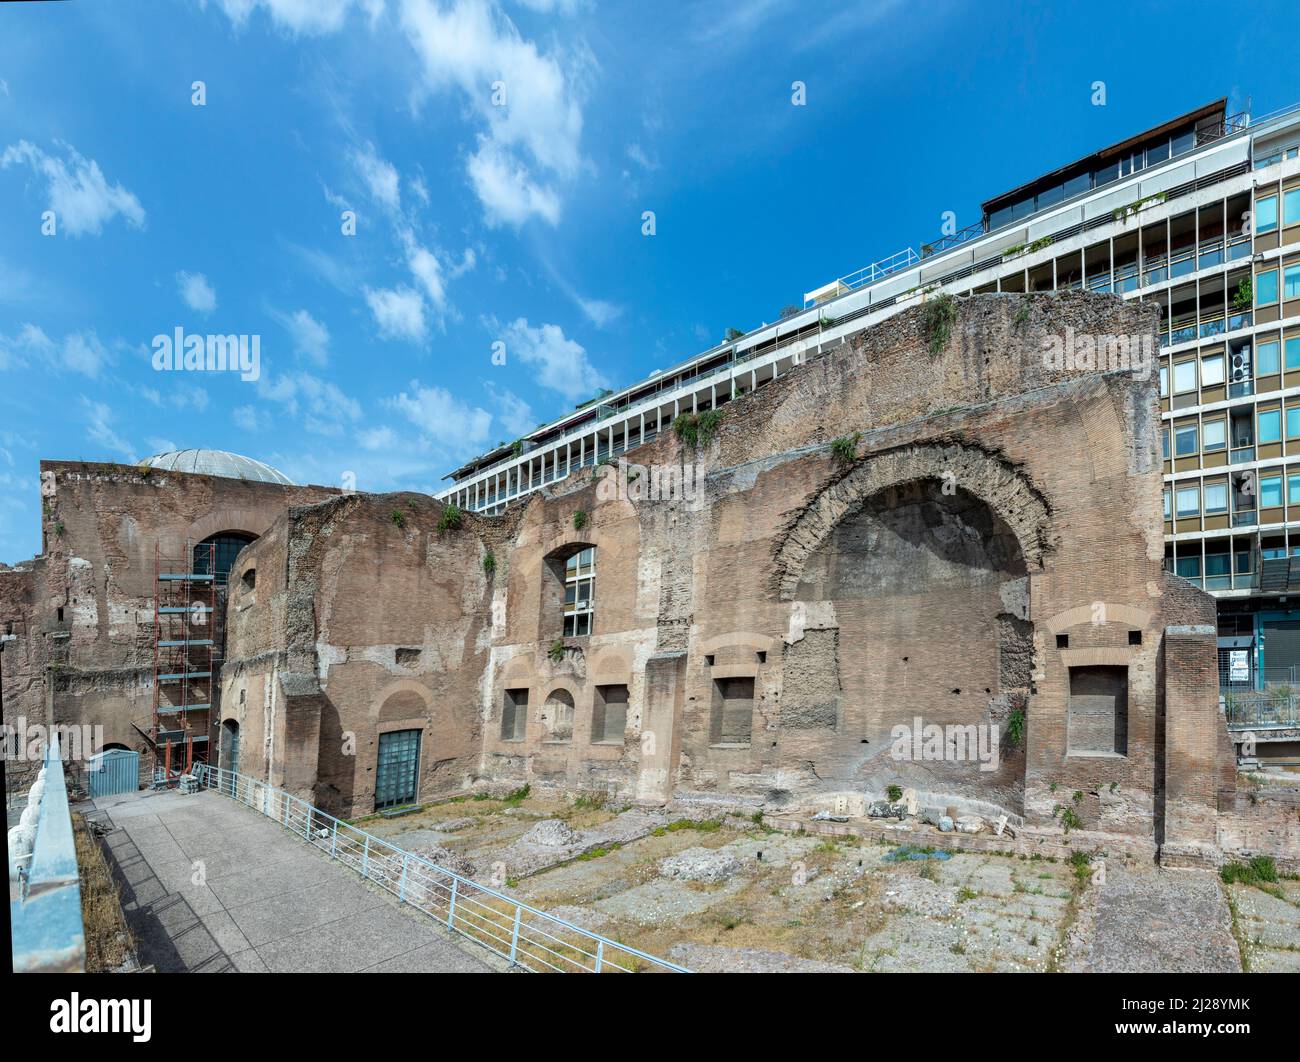 Rome, Italy - August 1, 2021: view to the ruins of baths of Diocletian, a historic public bath from roman times situated near the train station Termin Stock Photo